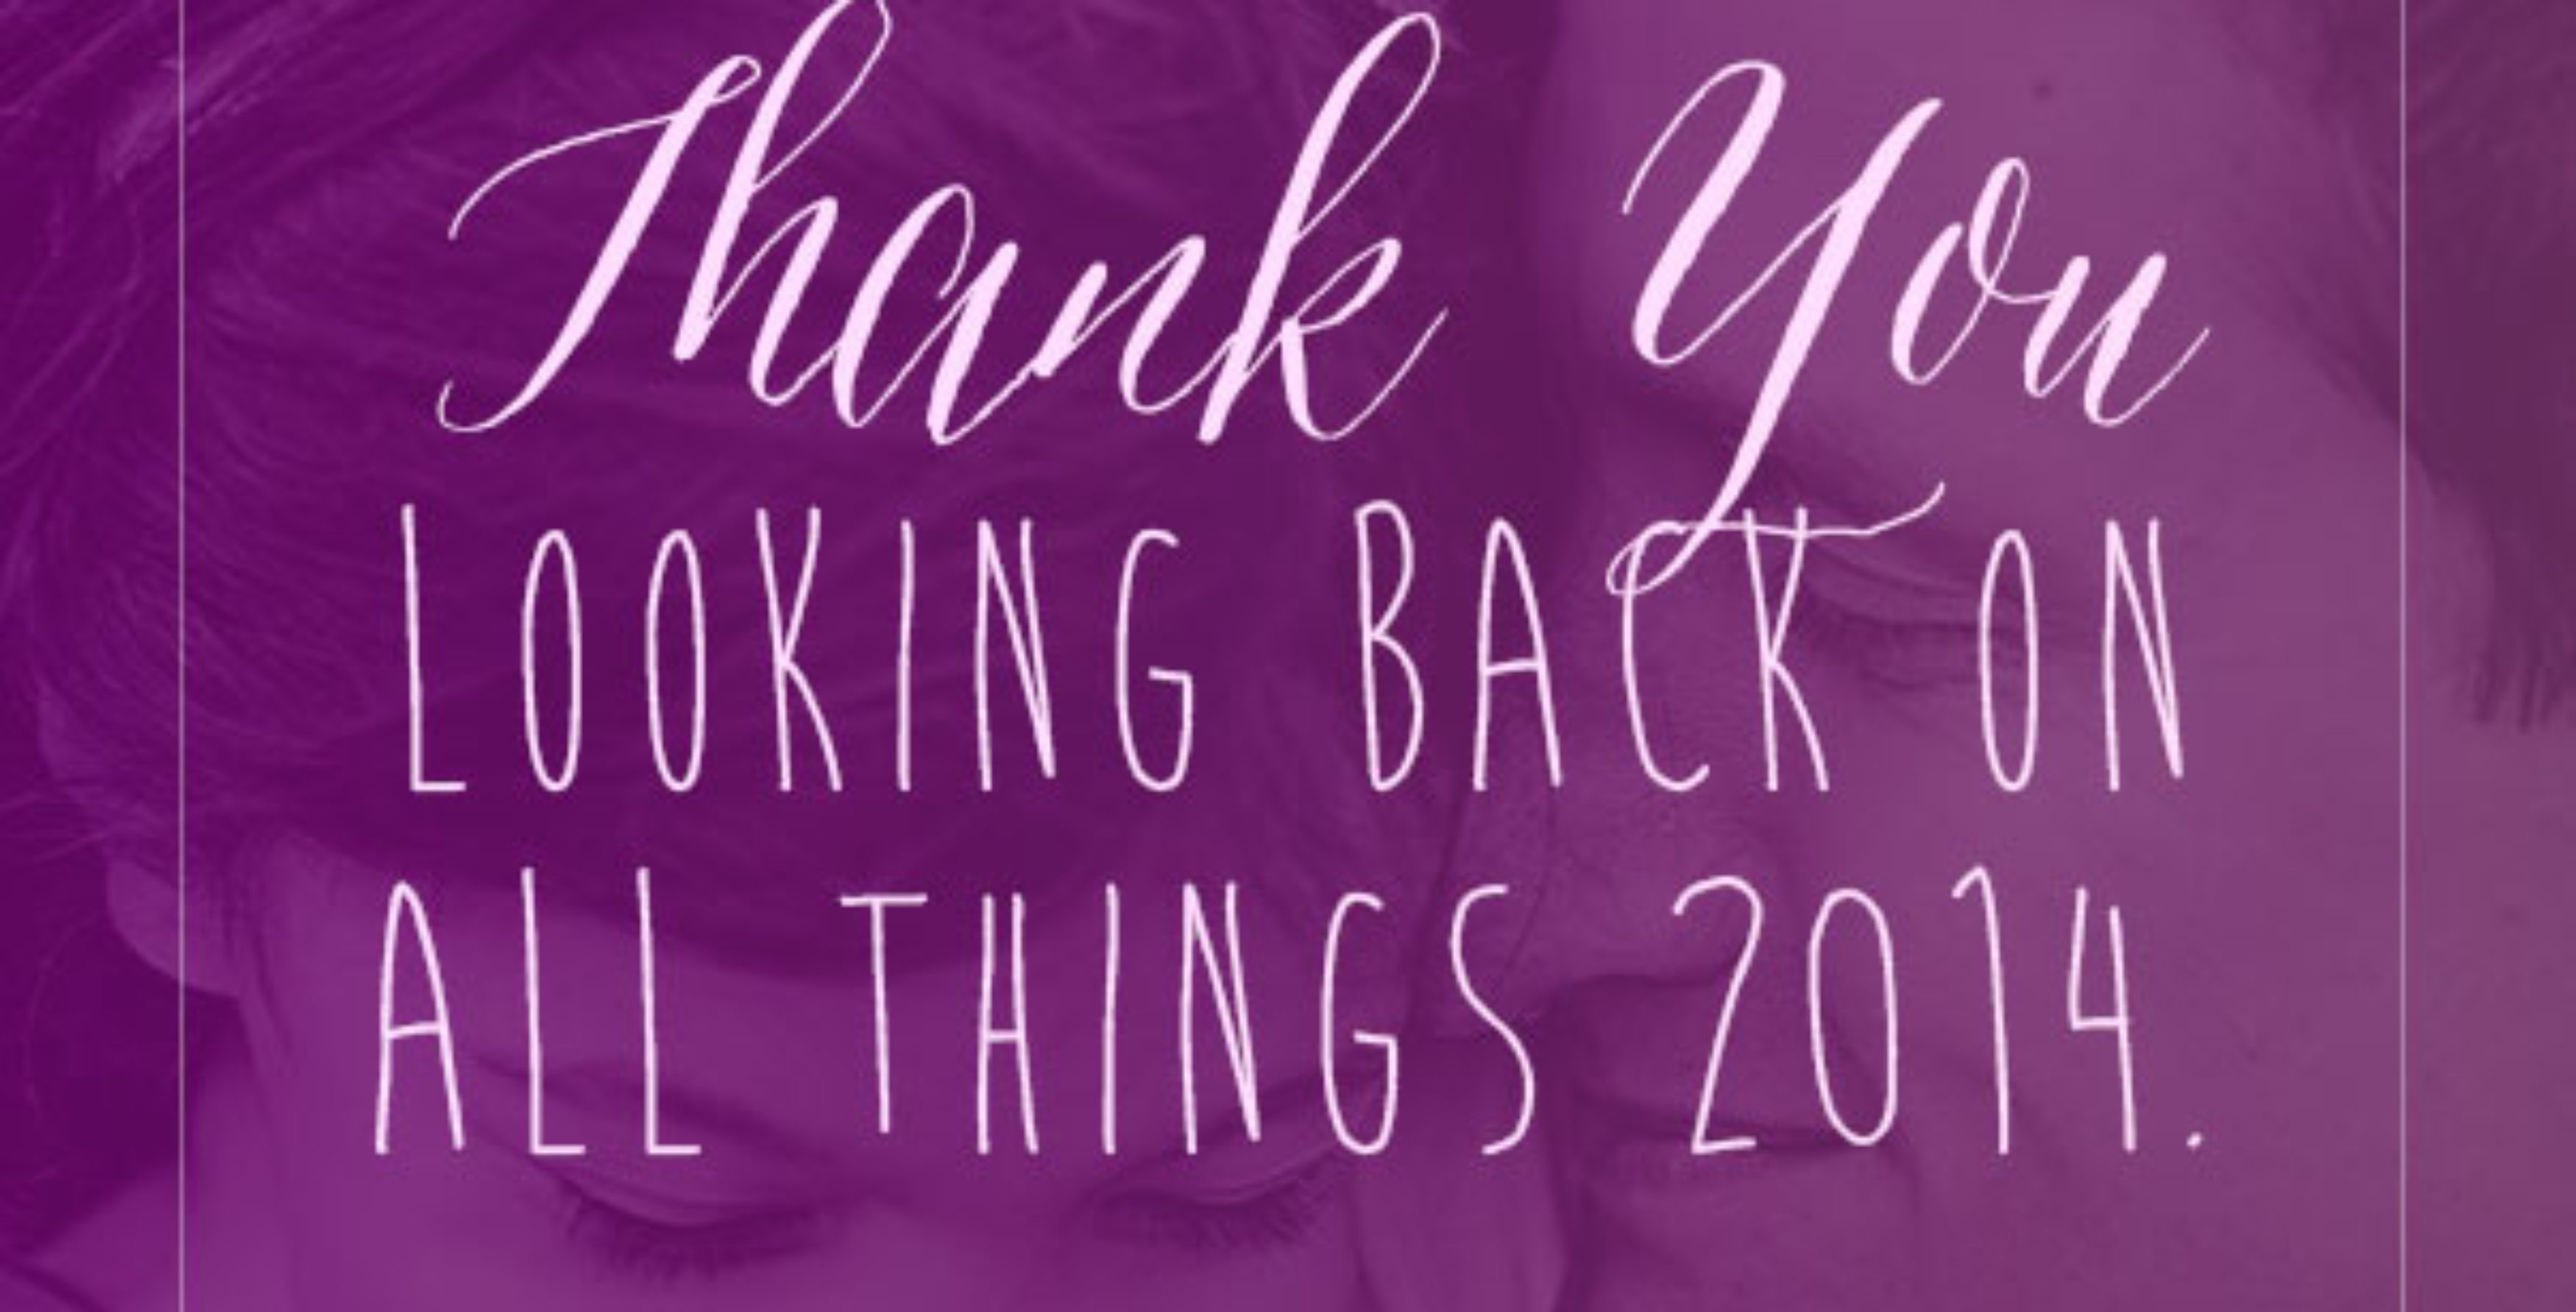 2014 in Review! 